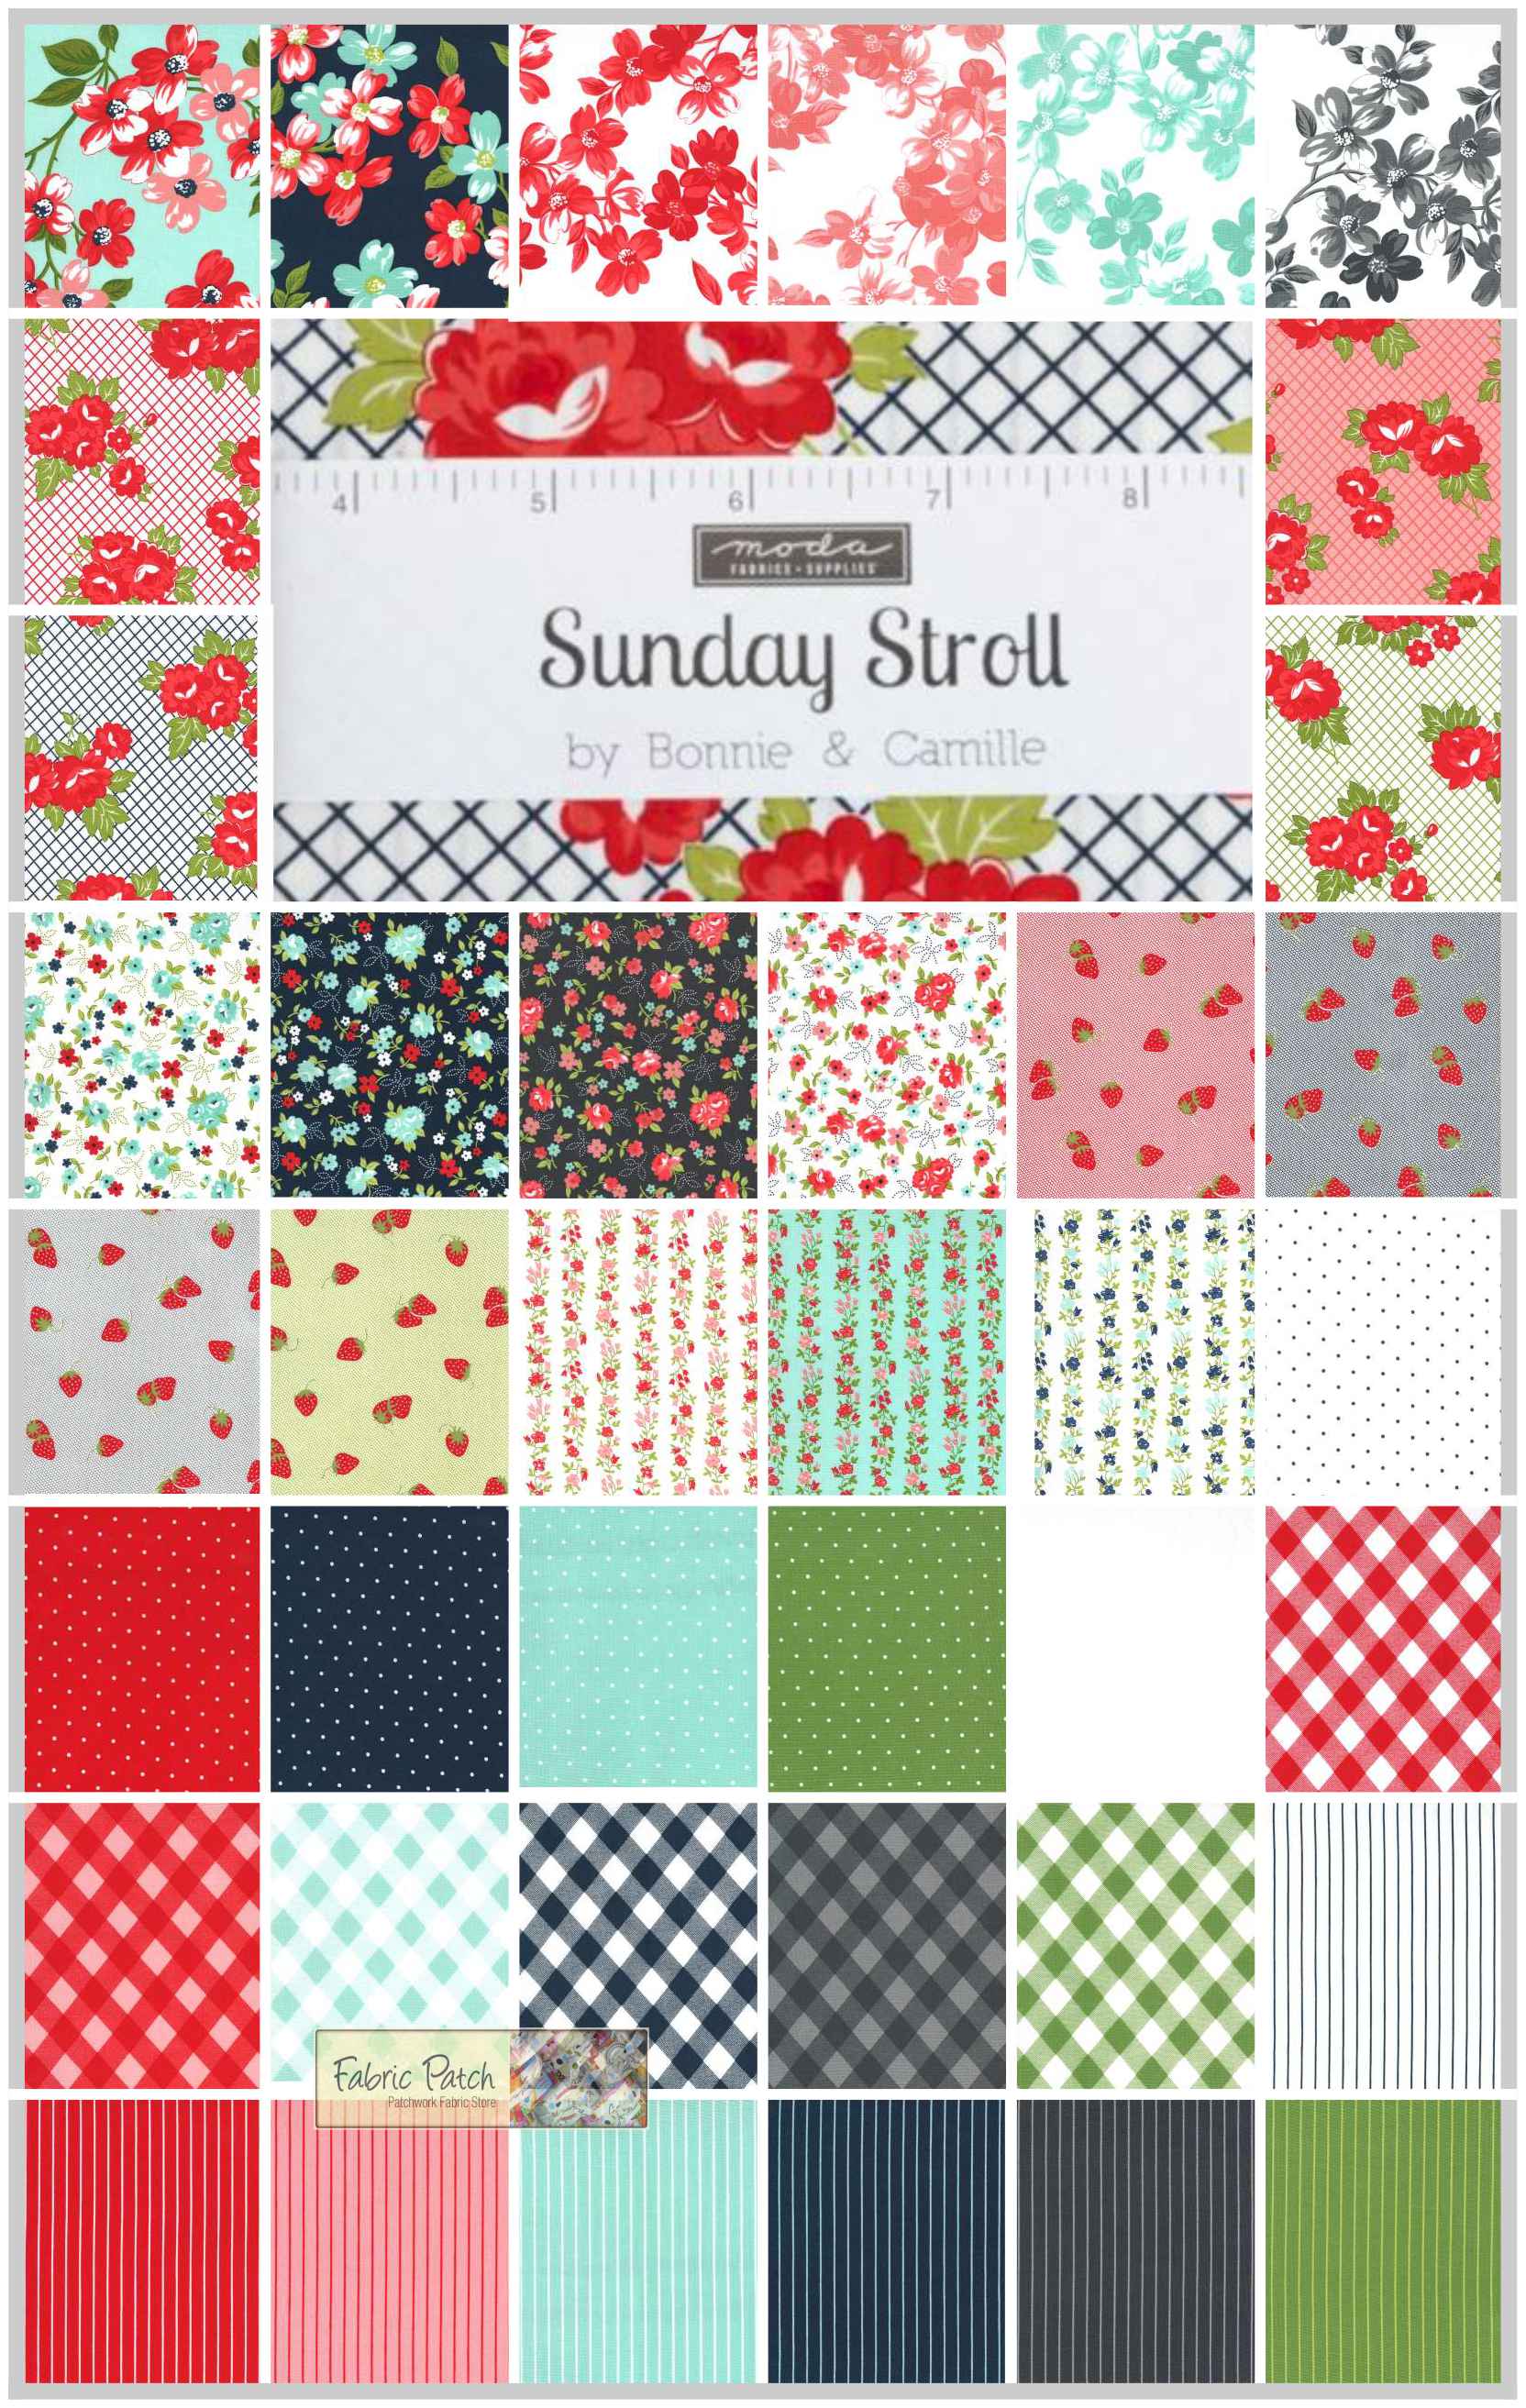 Sunday Stroll layer cake by Bonnie & Camille for Moda Fabrics - patchwork and quilting fabric - Patchwork Quilting Fabric